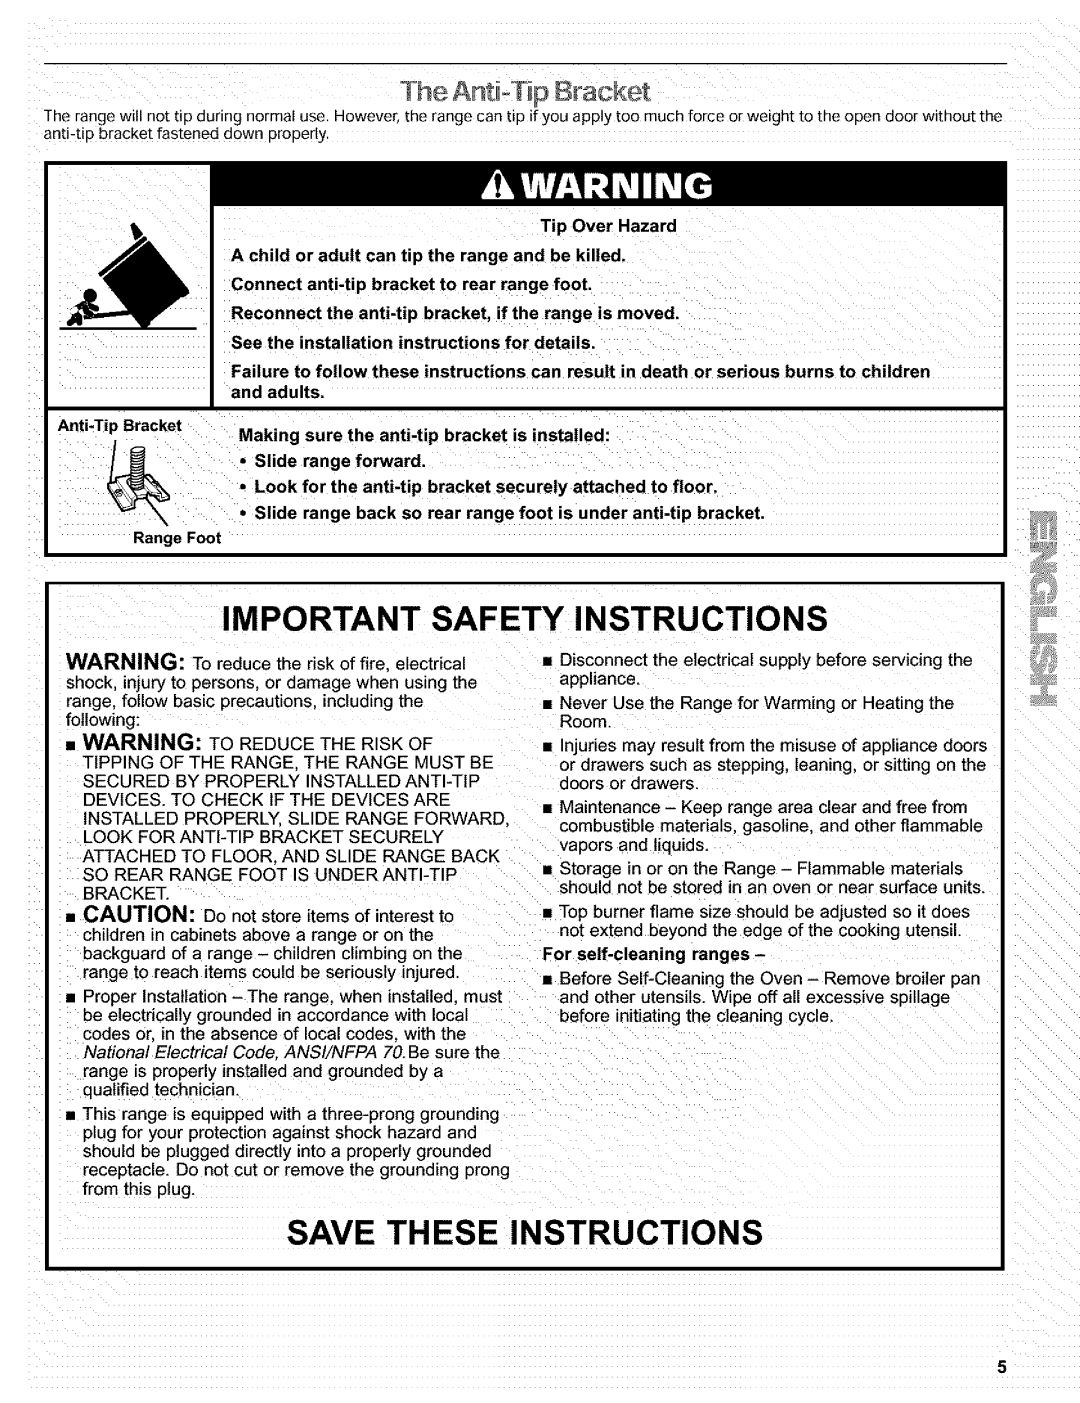 Kenmore 665.72002 Important Safety Instructions, Save These Instructions, h AntioTiD Bracket, Tip Over Hazard, Range Foot 